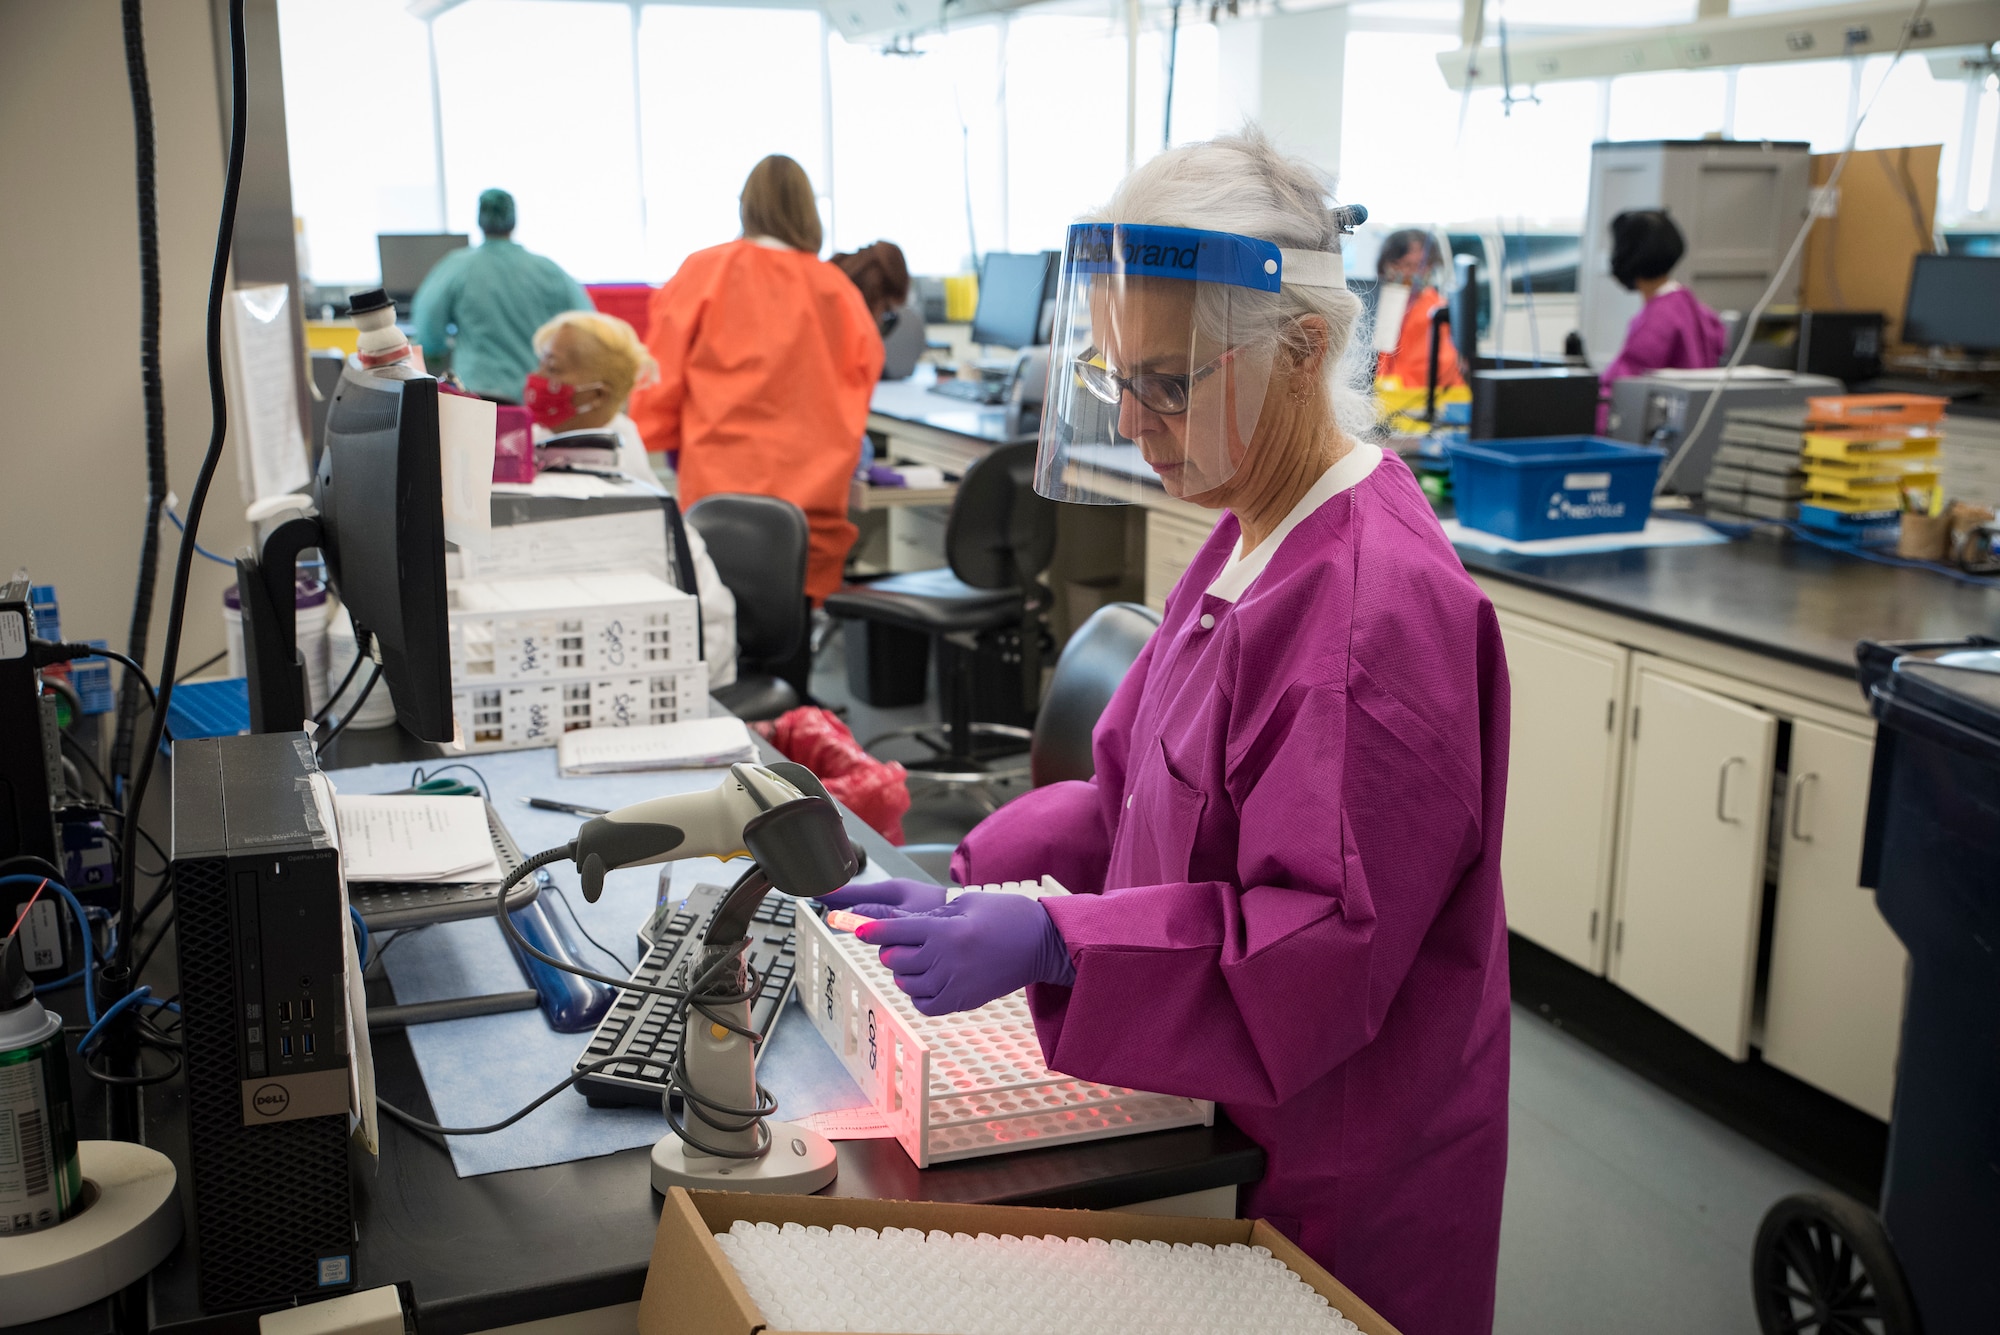 Delinda Rillo, a medical specimen processing assistant from the United States Air Force School of Aerospace Medicine’s Epidemiology Laboratory logs in samples for COVID-19 testing June 2, 2020. The Epi Lab is the sole clinical reference lab in the Air Force, and USAFSAM is part of AFRL’s 711th Human Performance Wing headquartered at Wright-Patterson Air Force Base in Dayton, Ohio. (U.S. Air Force photo by Richard Eldridge)